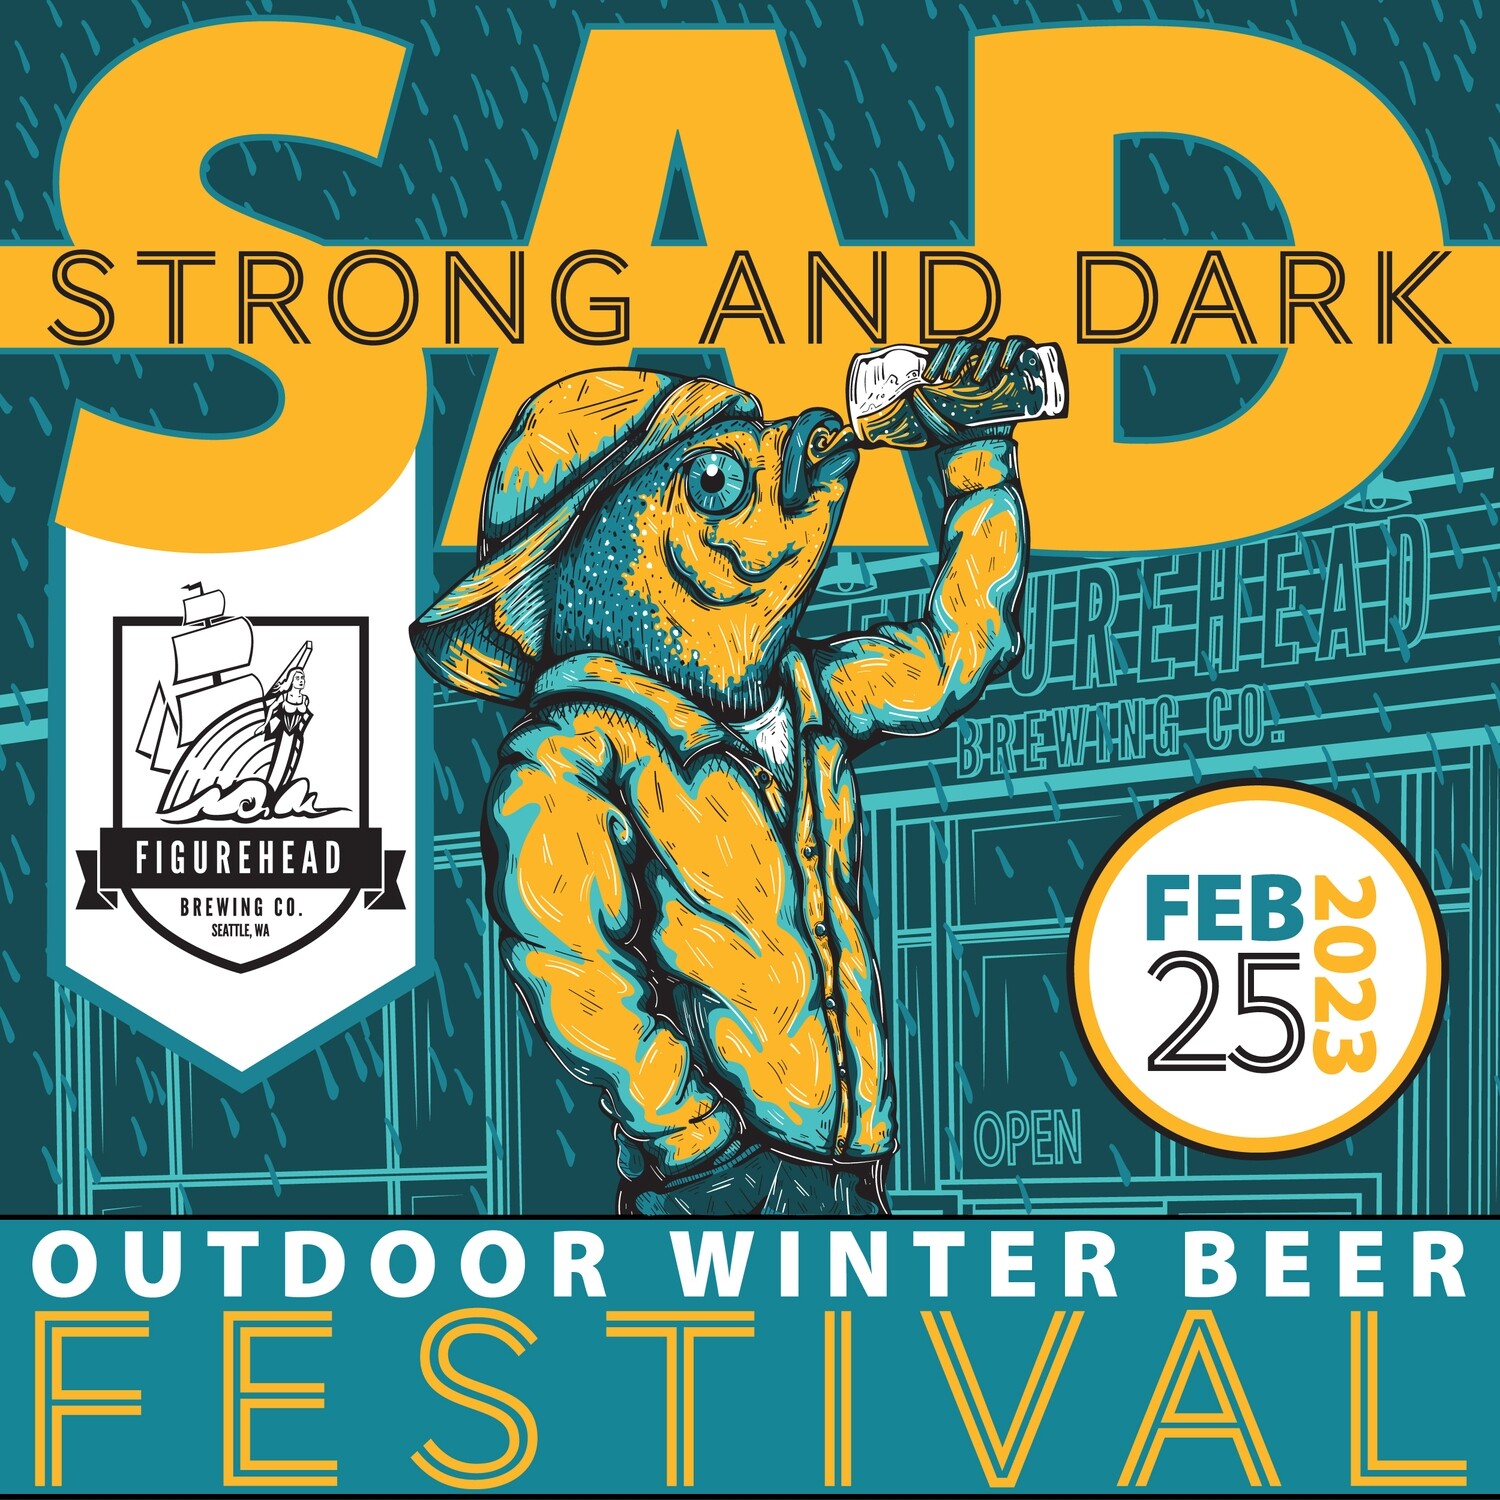 SAD (Strong and Dark) Outdoor Beer Festival